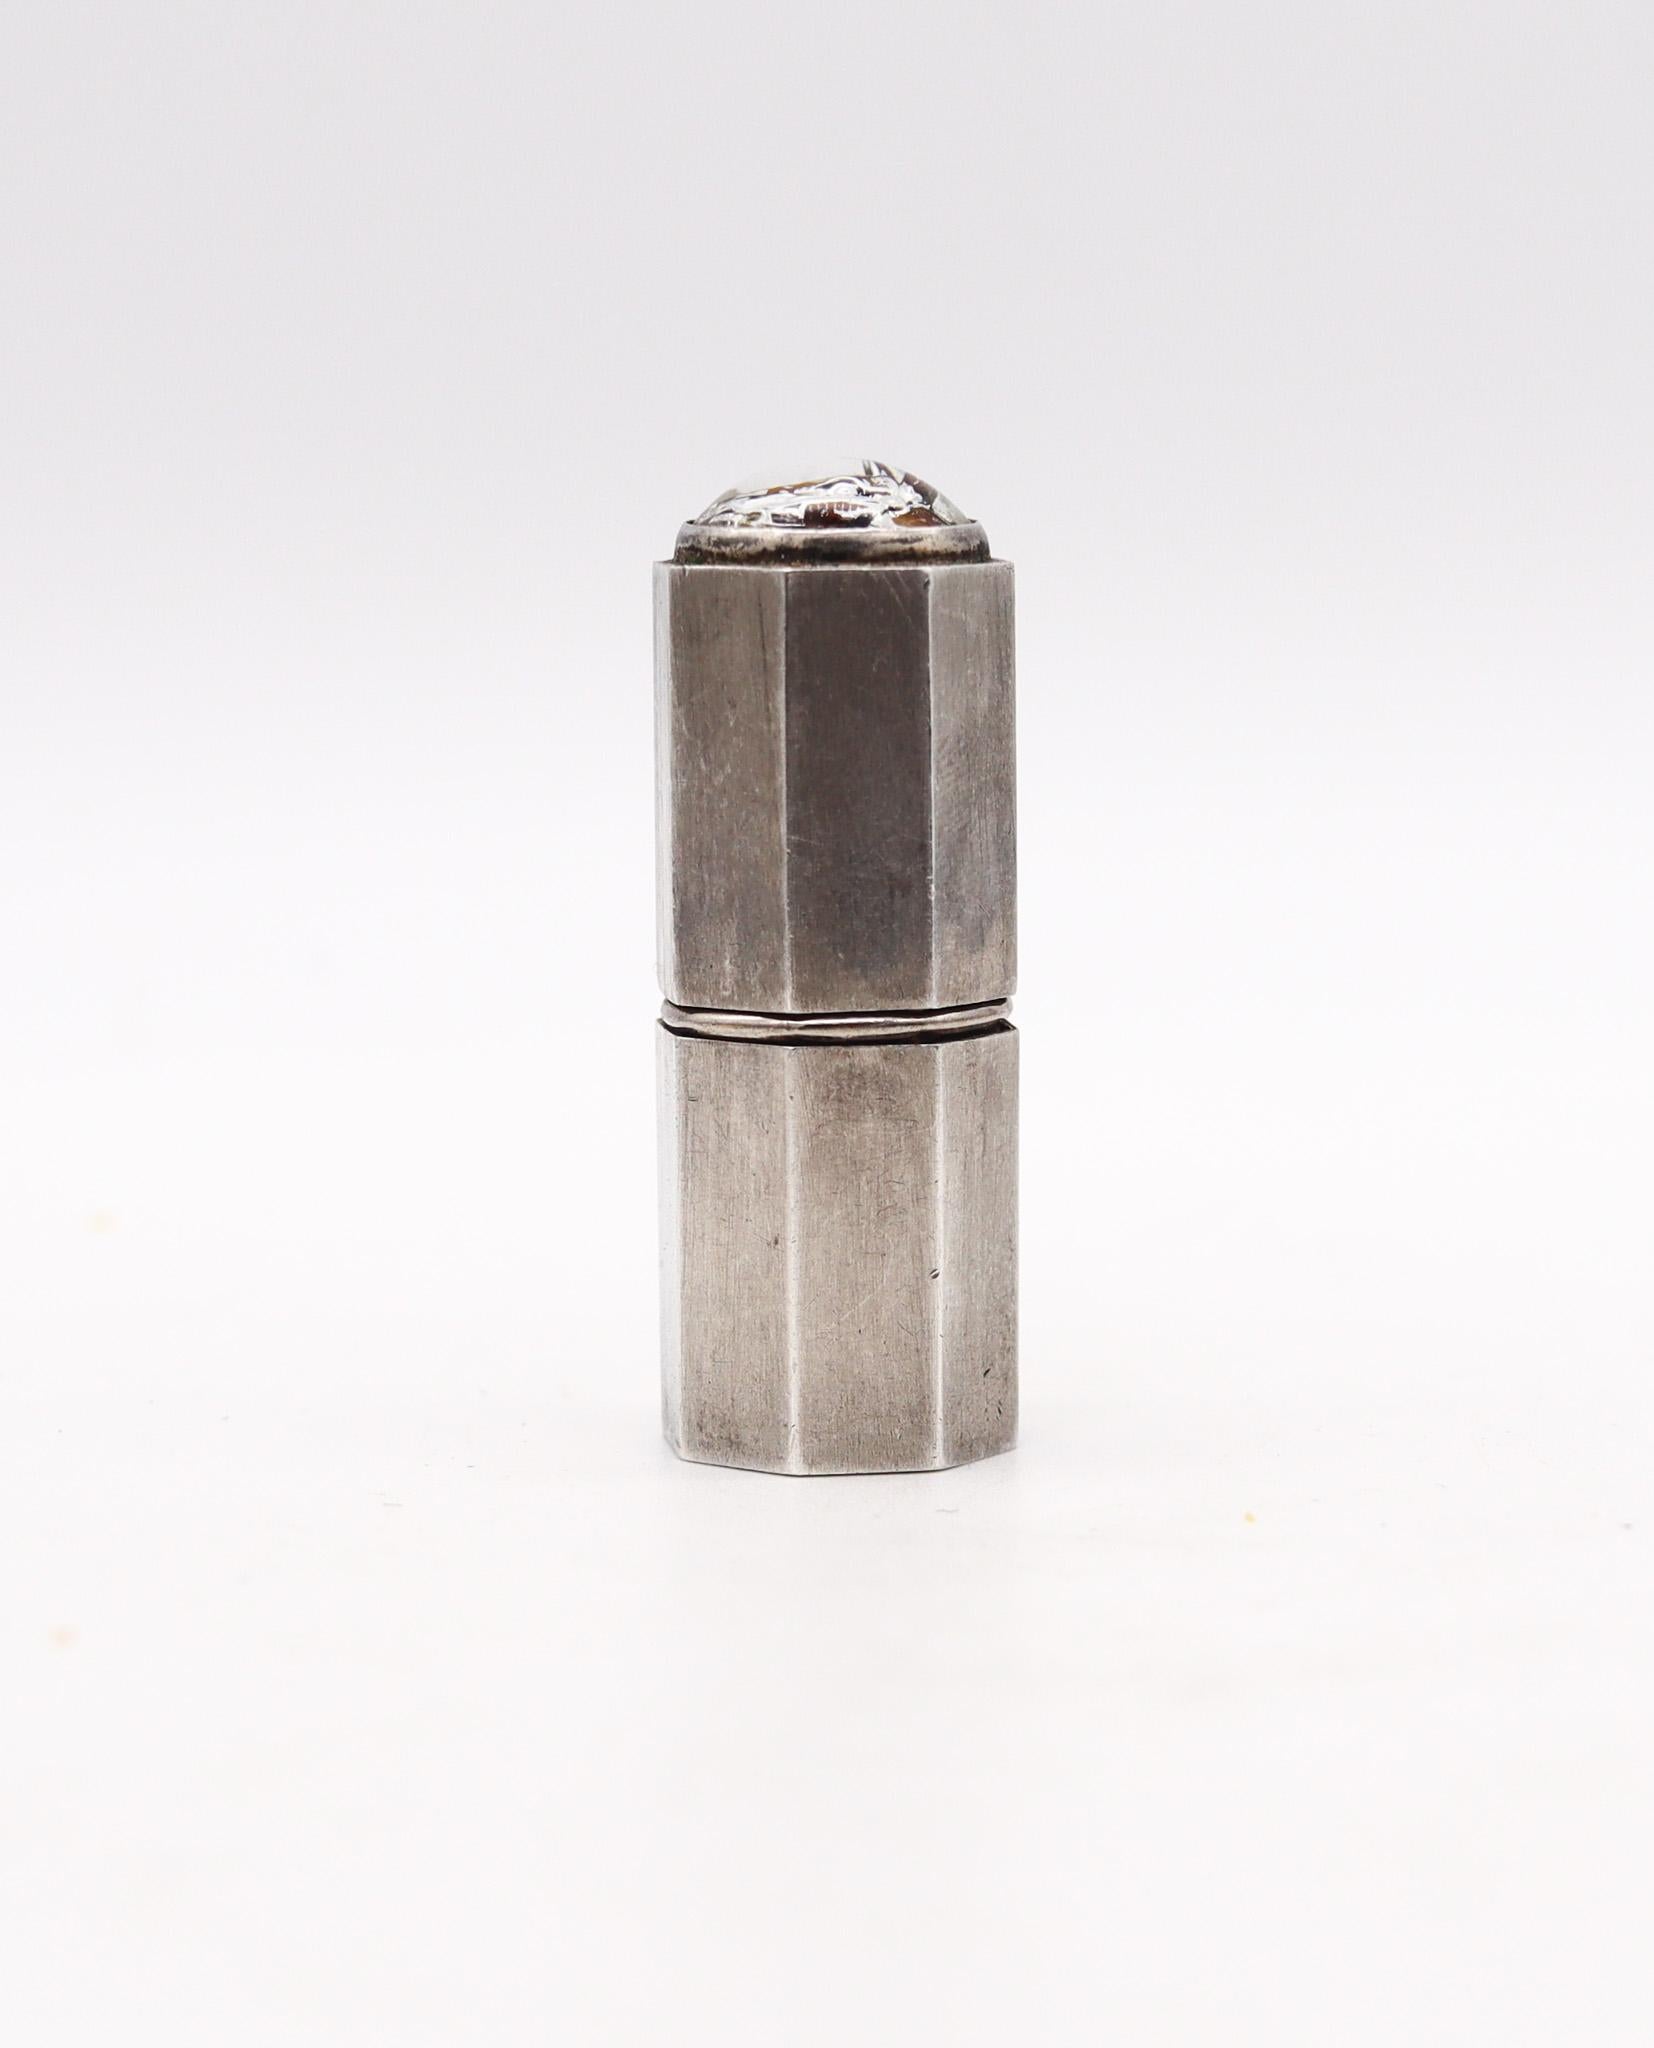 An art deco petrol lighter designed by Naldun.

Very beautiful and useful petrol lighter, created in America by the Naldun Company, back in the 1930. It was crafted as a slider piece in the art deco style, with an octagonal shape in solid .925/.999